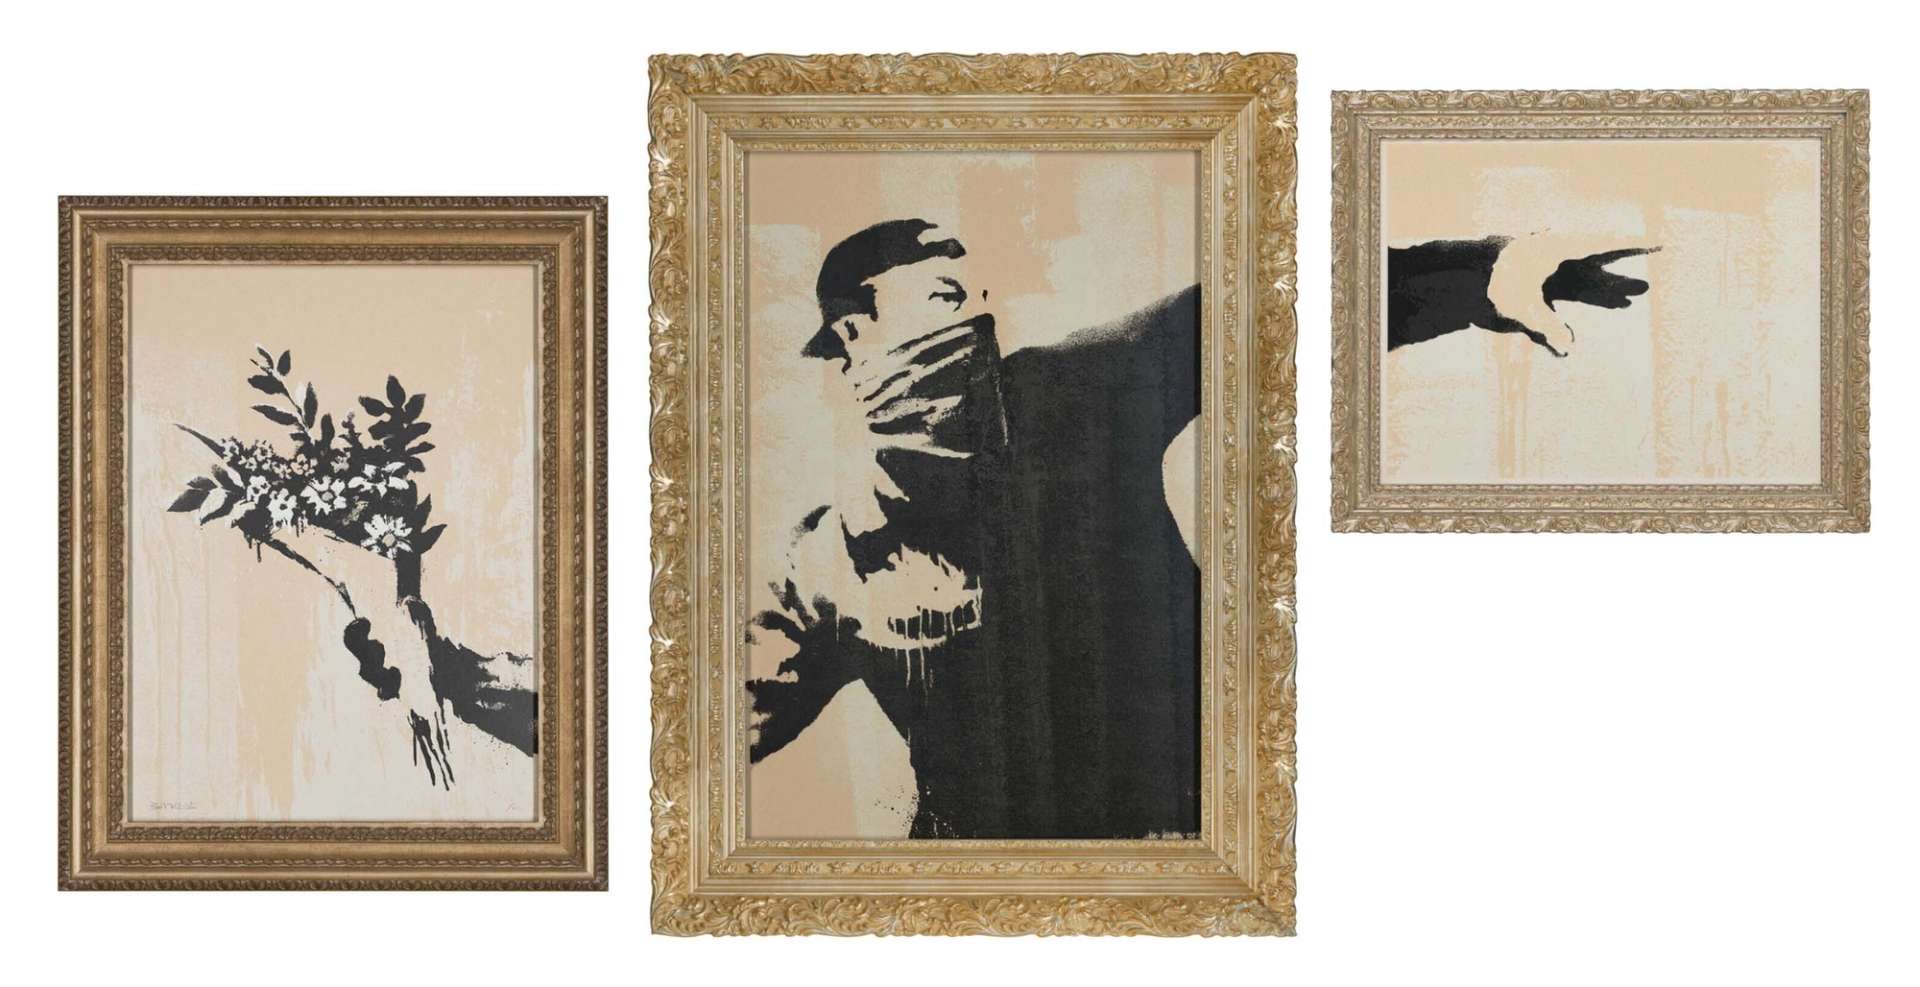 Banksy At Auction: Results & What We’ve Learned From Q1 2023